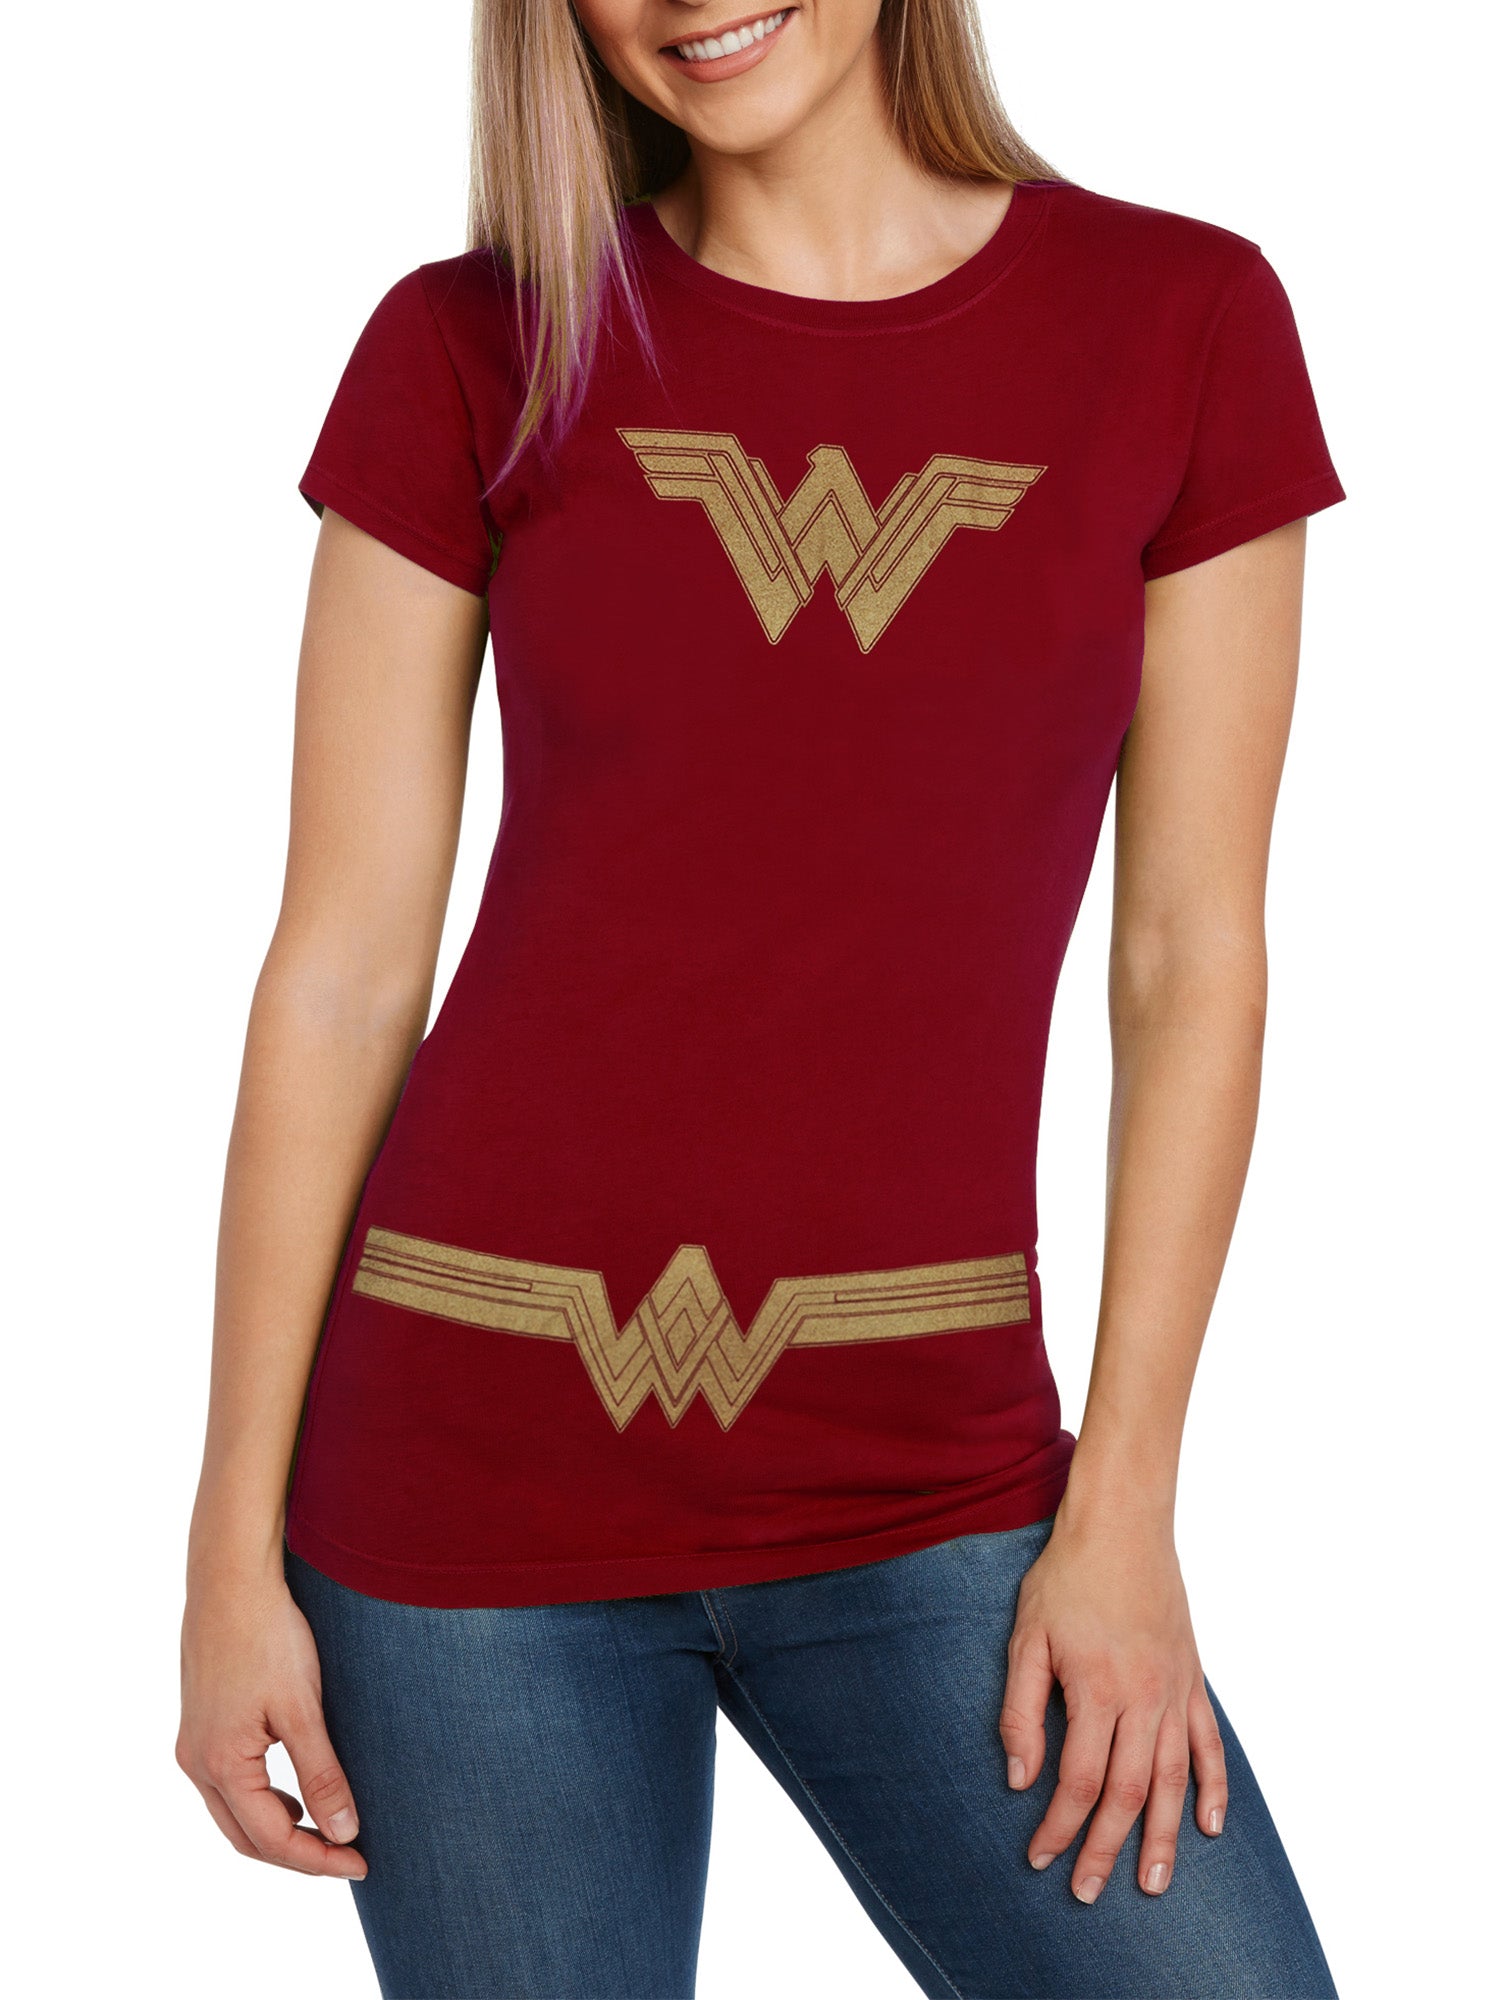 Women's Wonder Woman Costume T-Shirt Fitted - Red